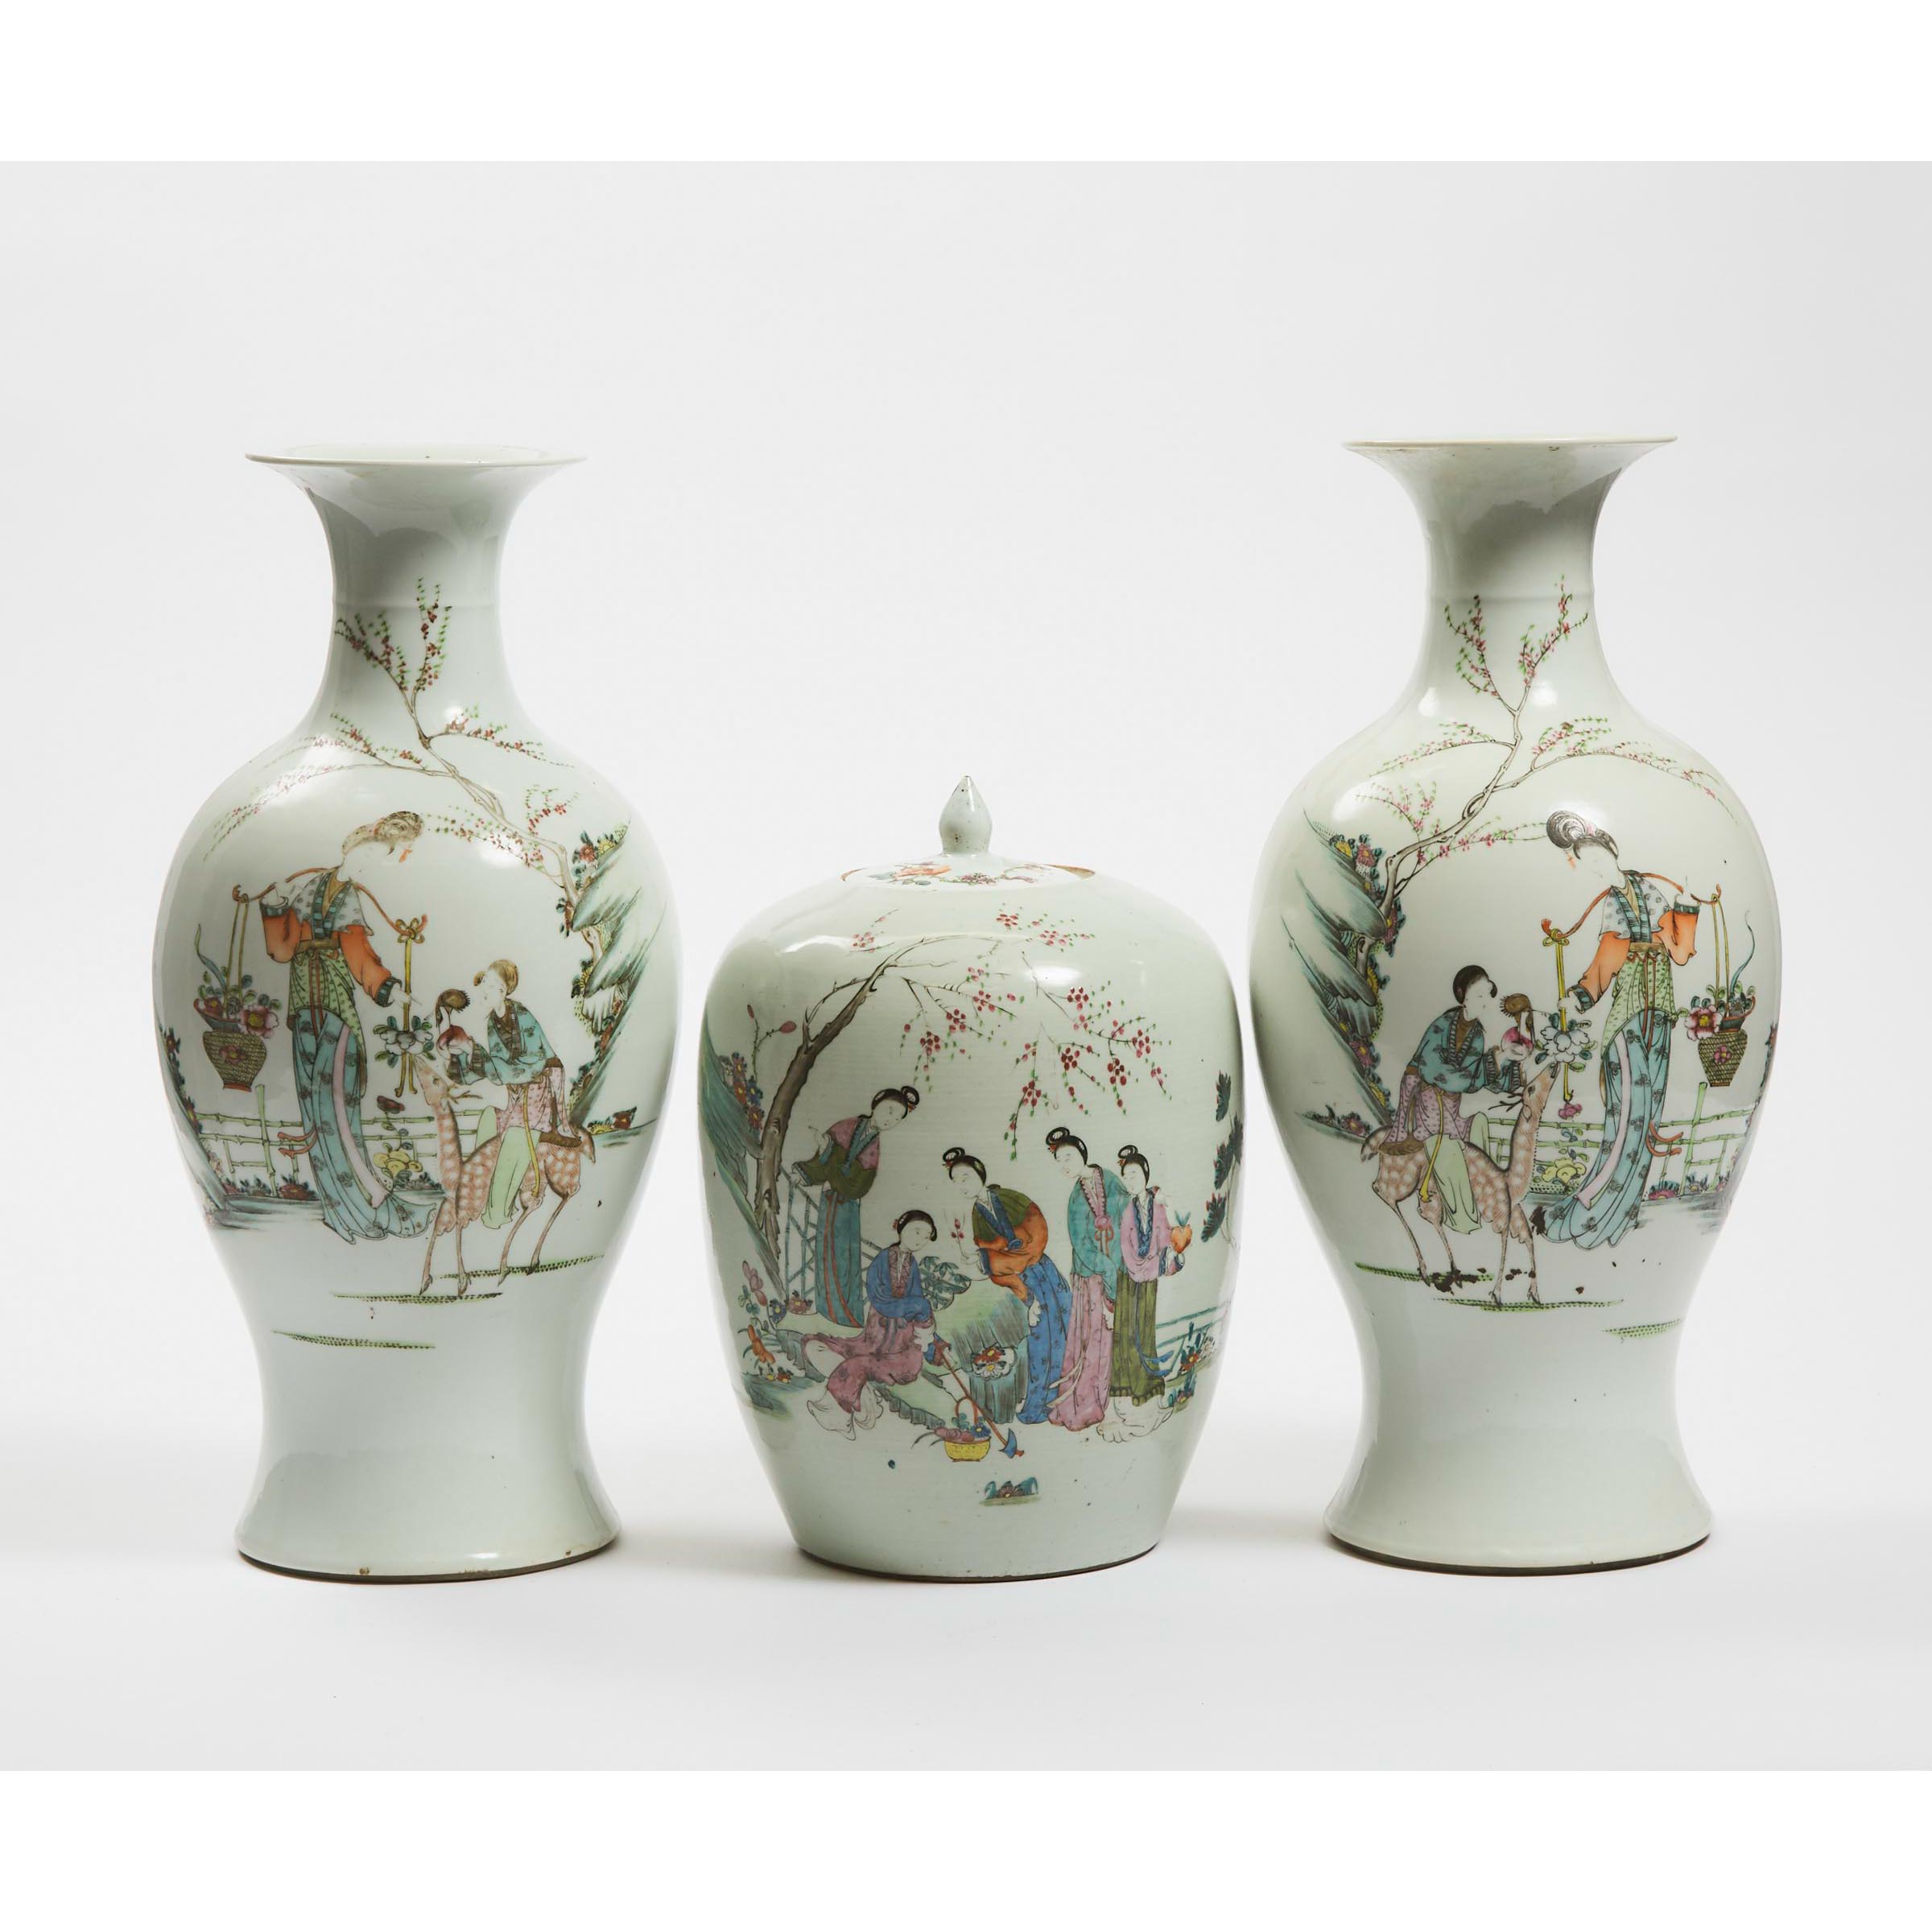 A Pair of Famille Rose Vases Together 3ac53d